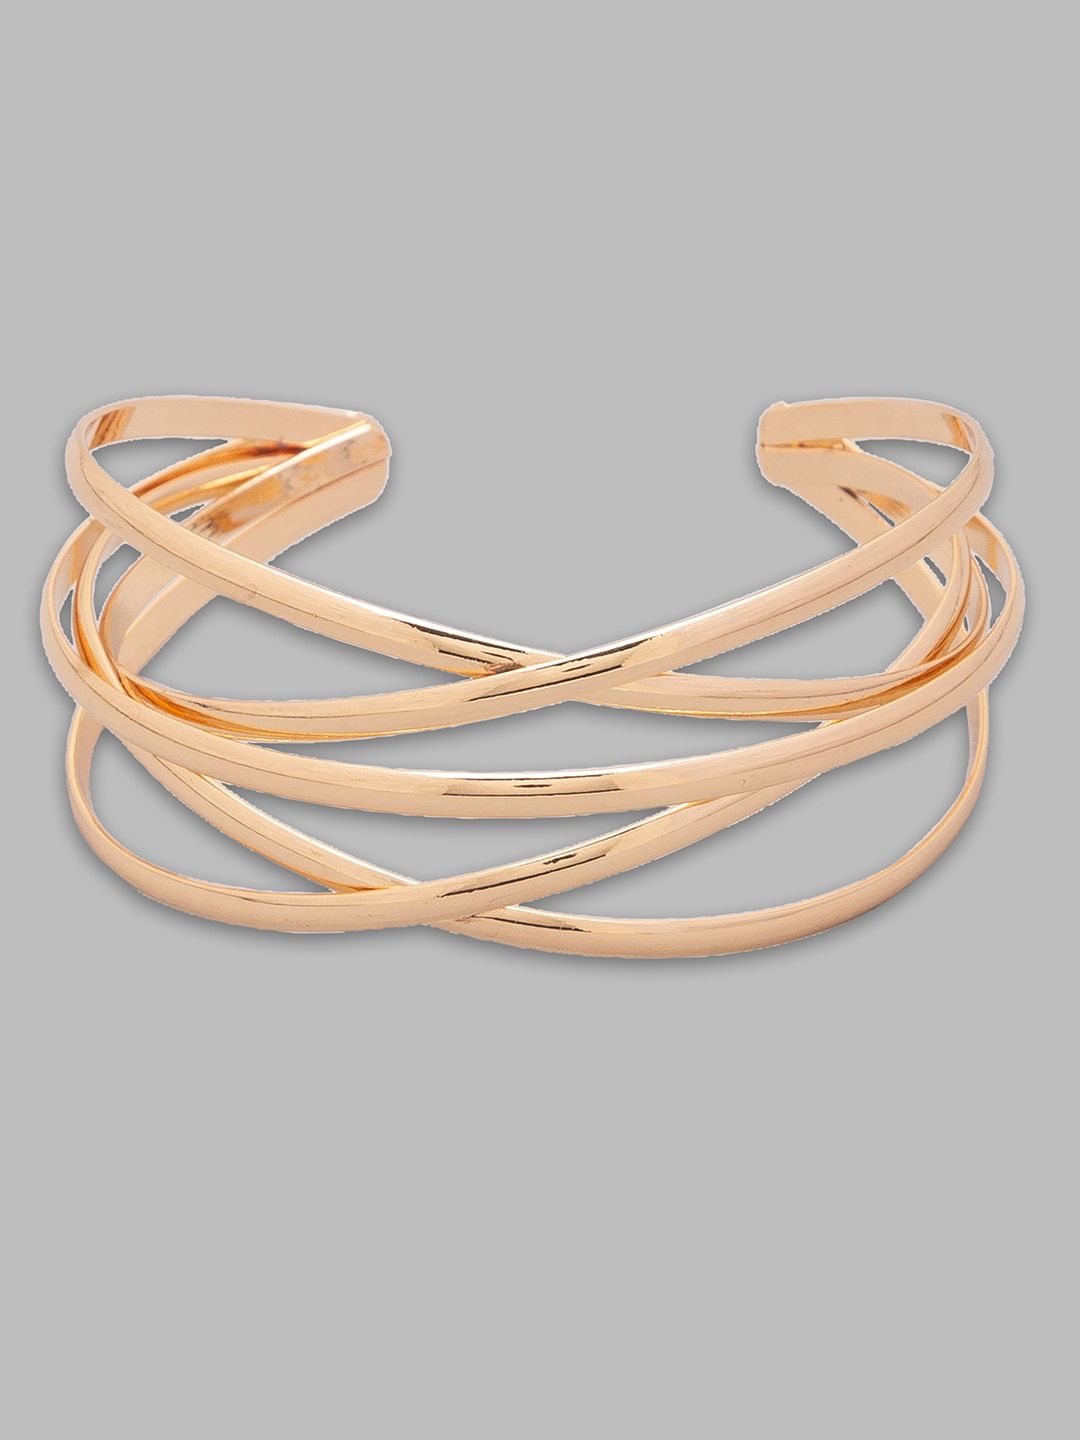 Globus Women Gold-Toned Gold-Plated Cuff Bracelet Price in India